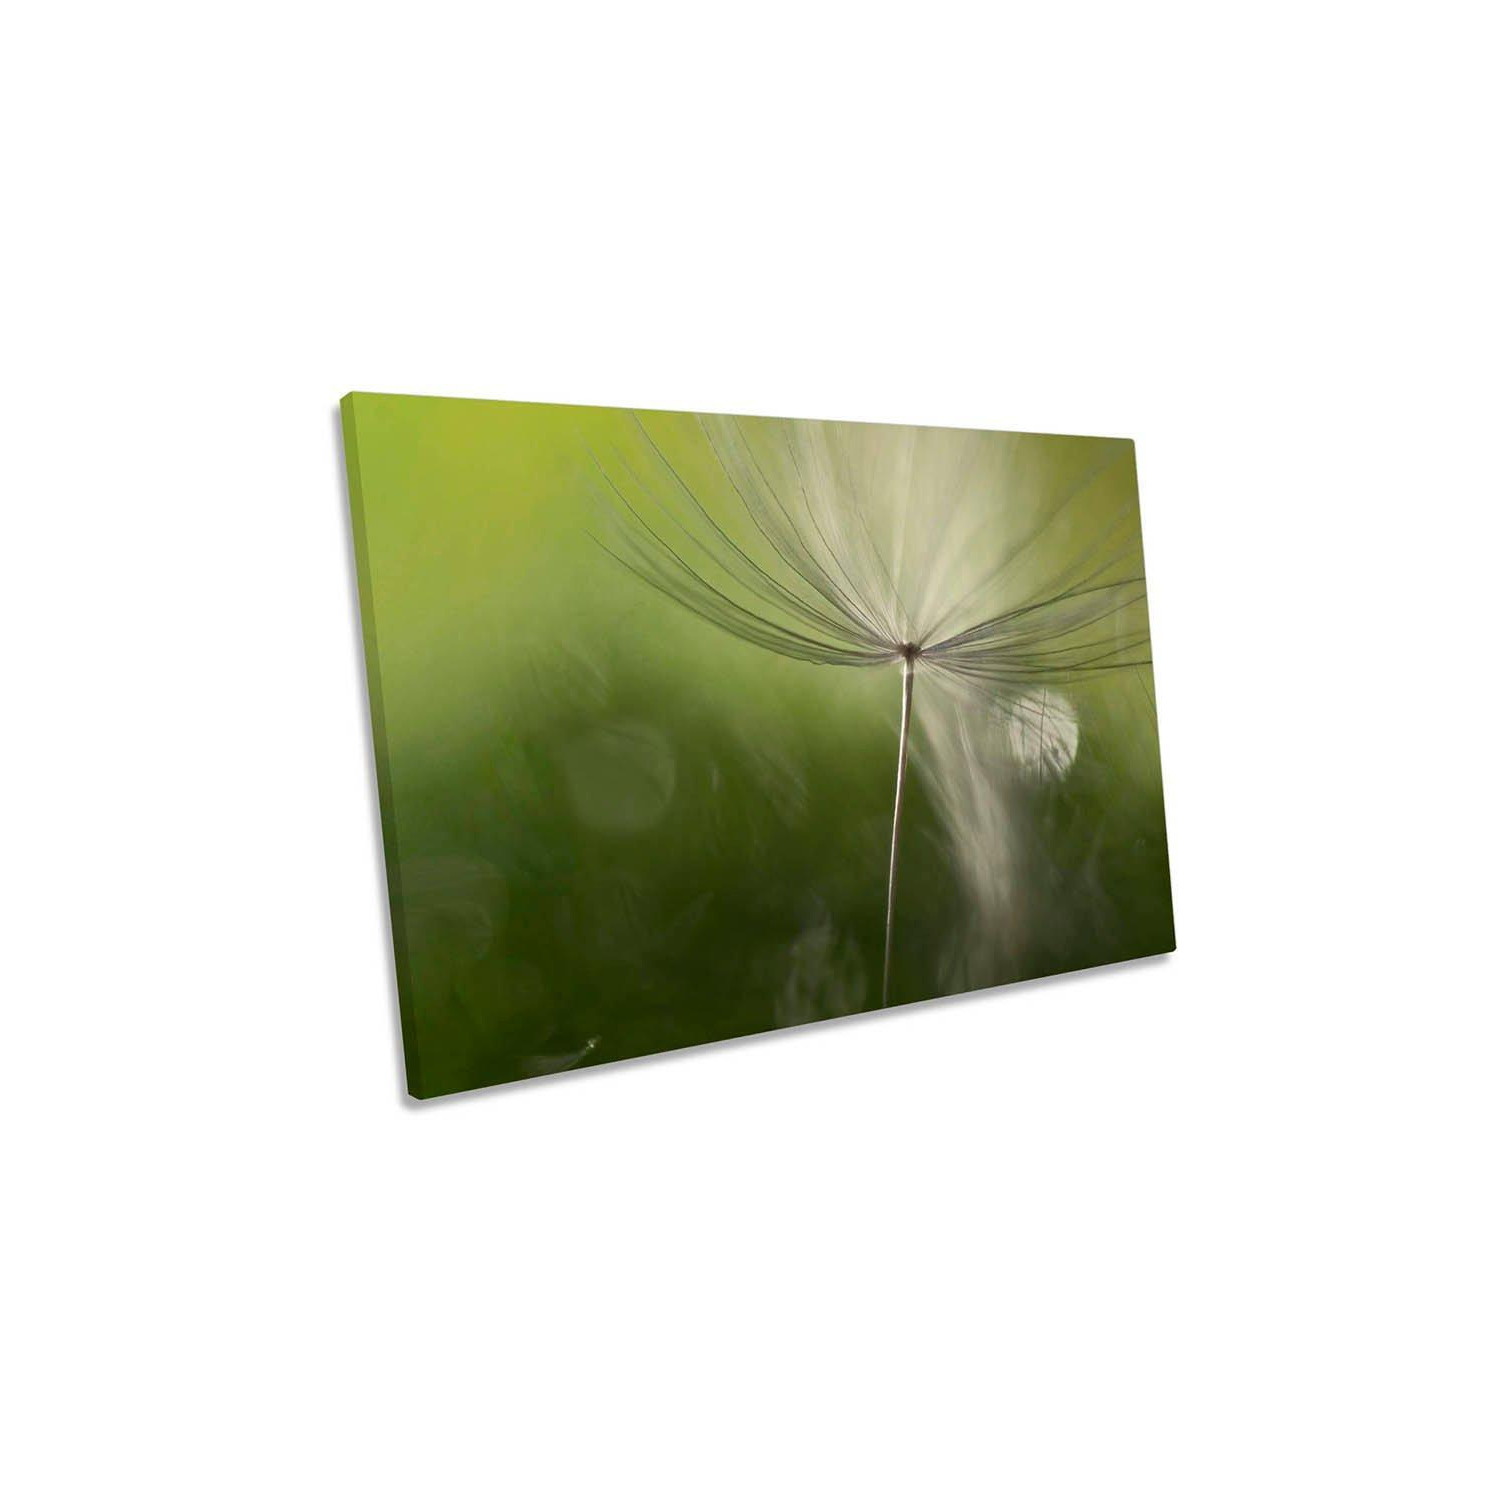 Shadows in the Green Floral Canvas Wall Art Picture Print - image 1